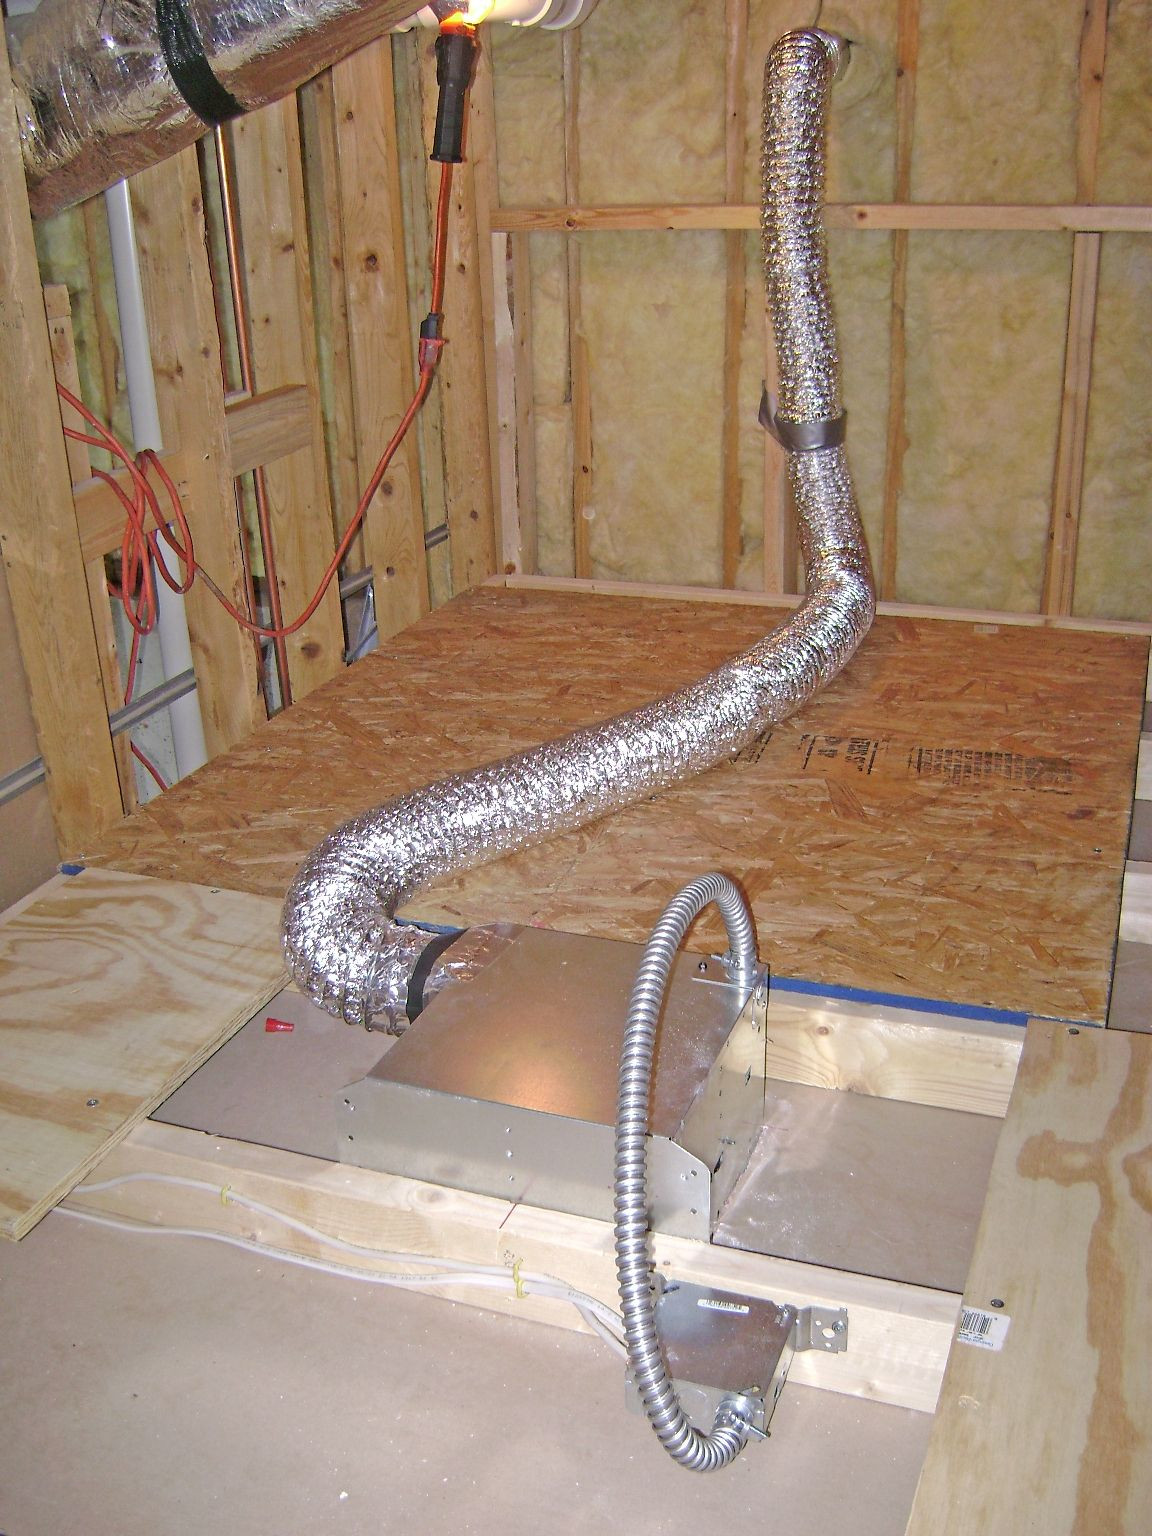 Basement Bathroom Exhaust Fan
 How to Finish a Basement Bathroom Install and Wire the